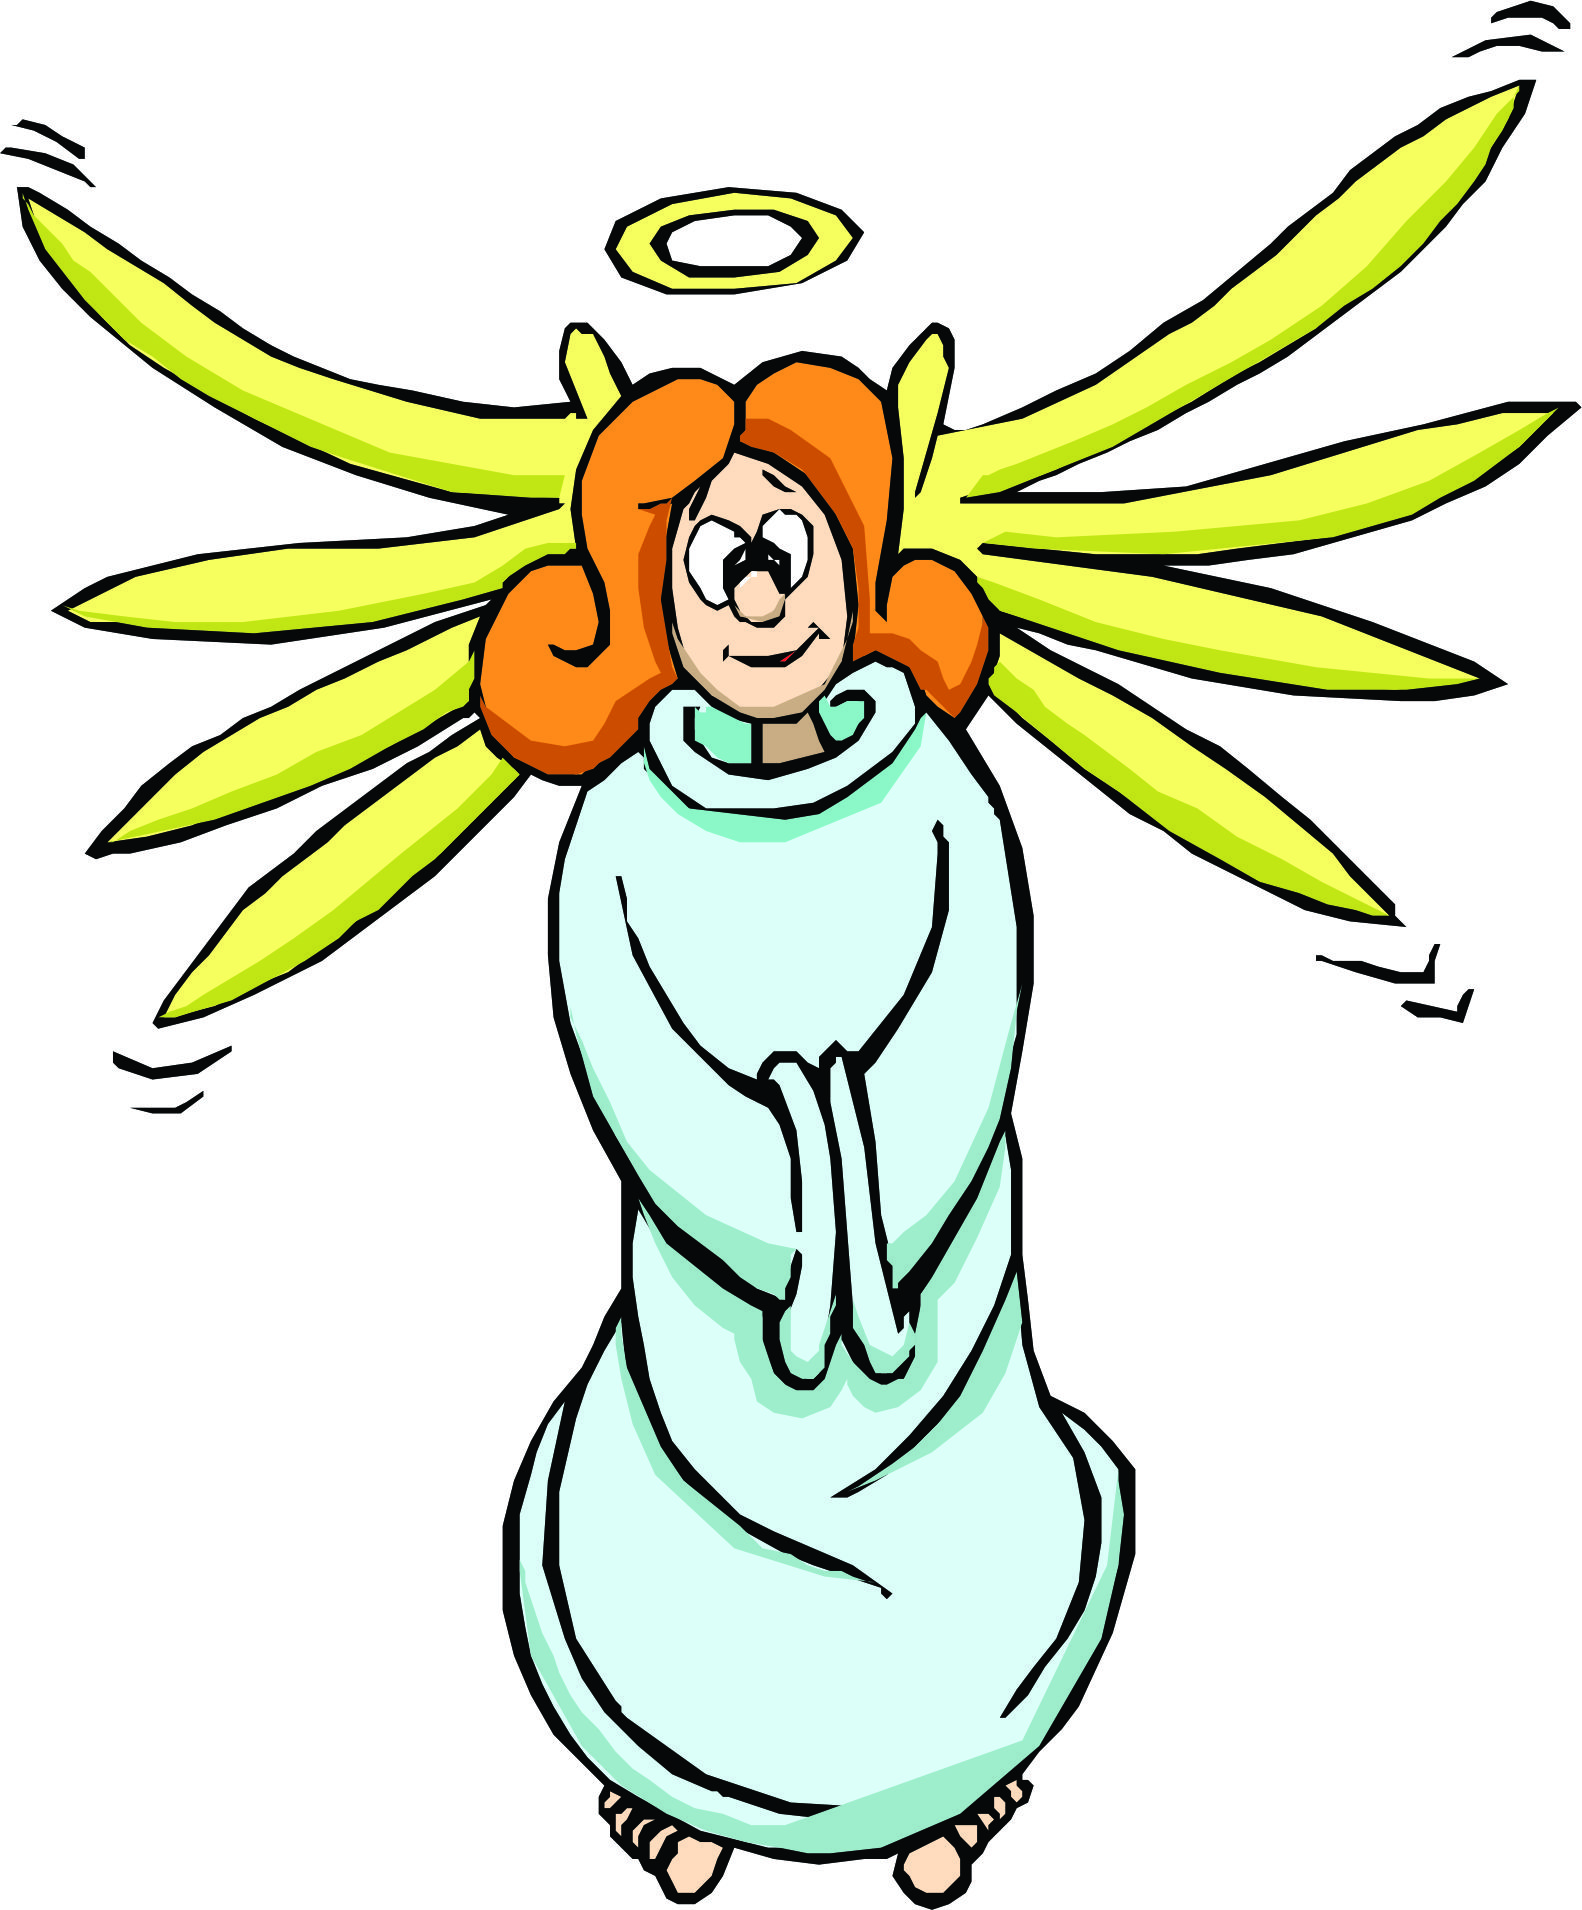 Angel Cartoon Images - Cliparts.co